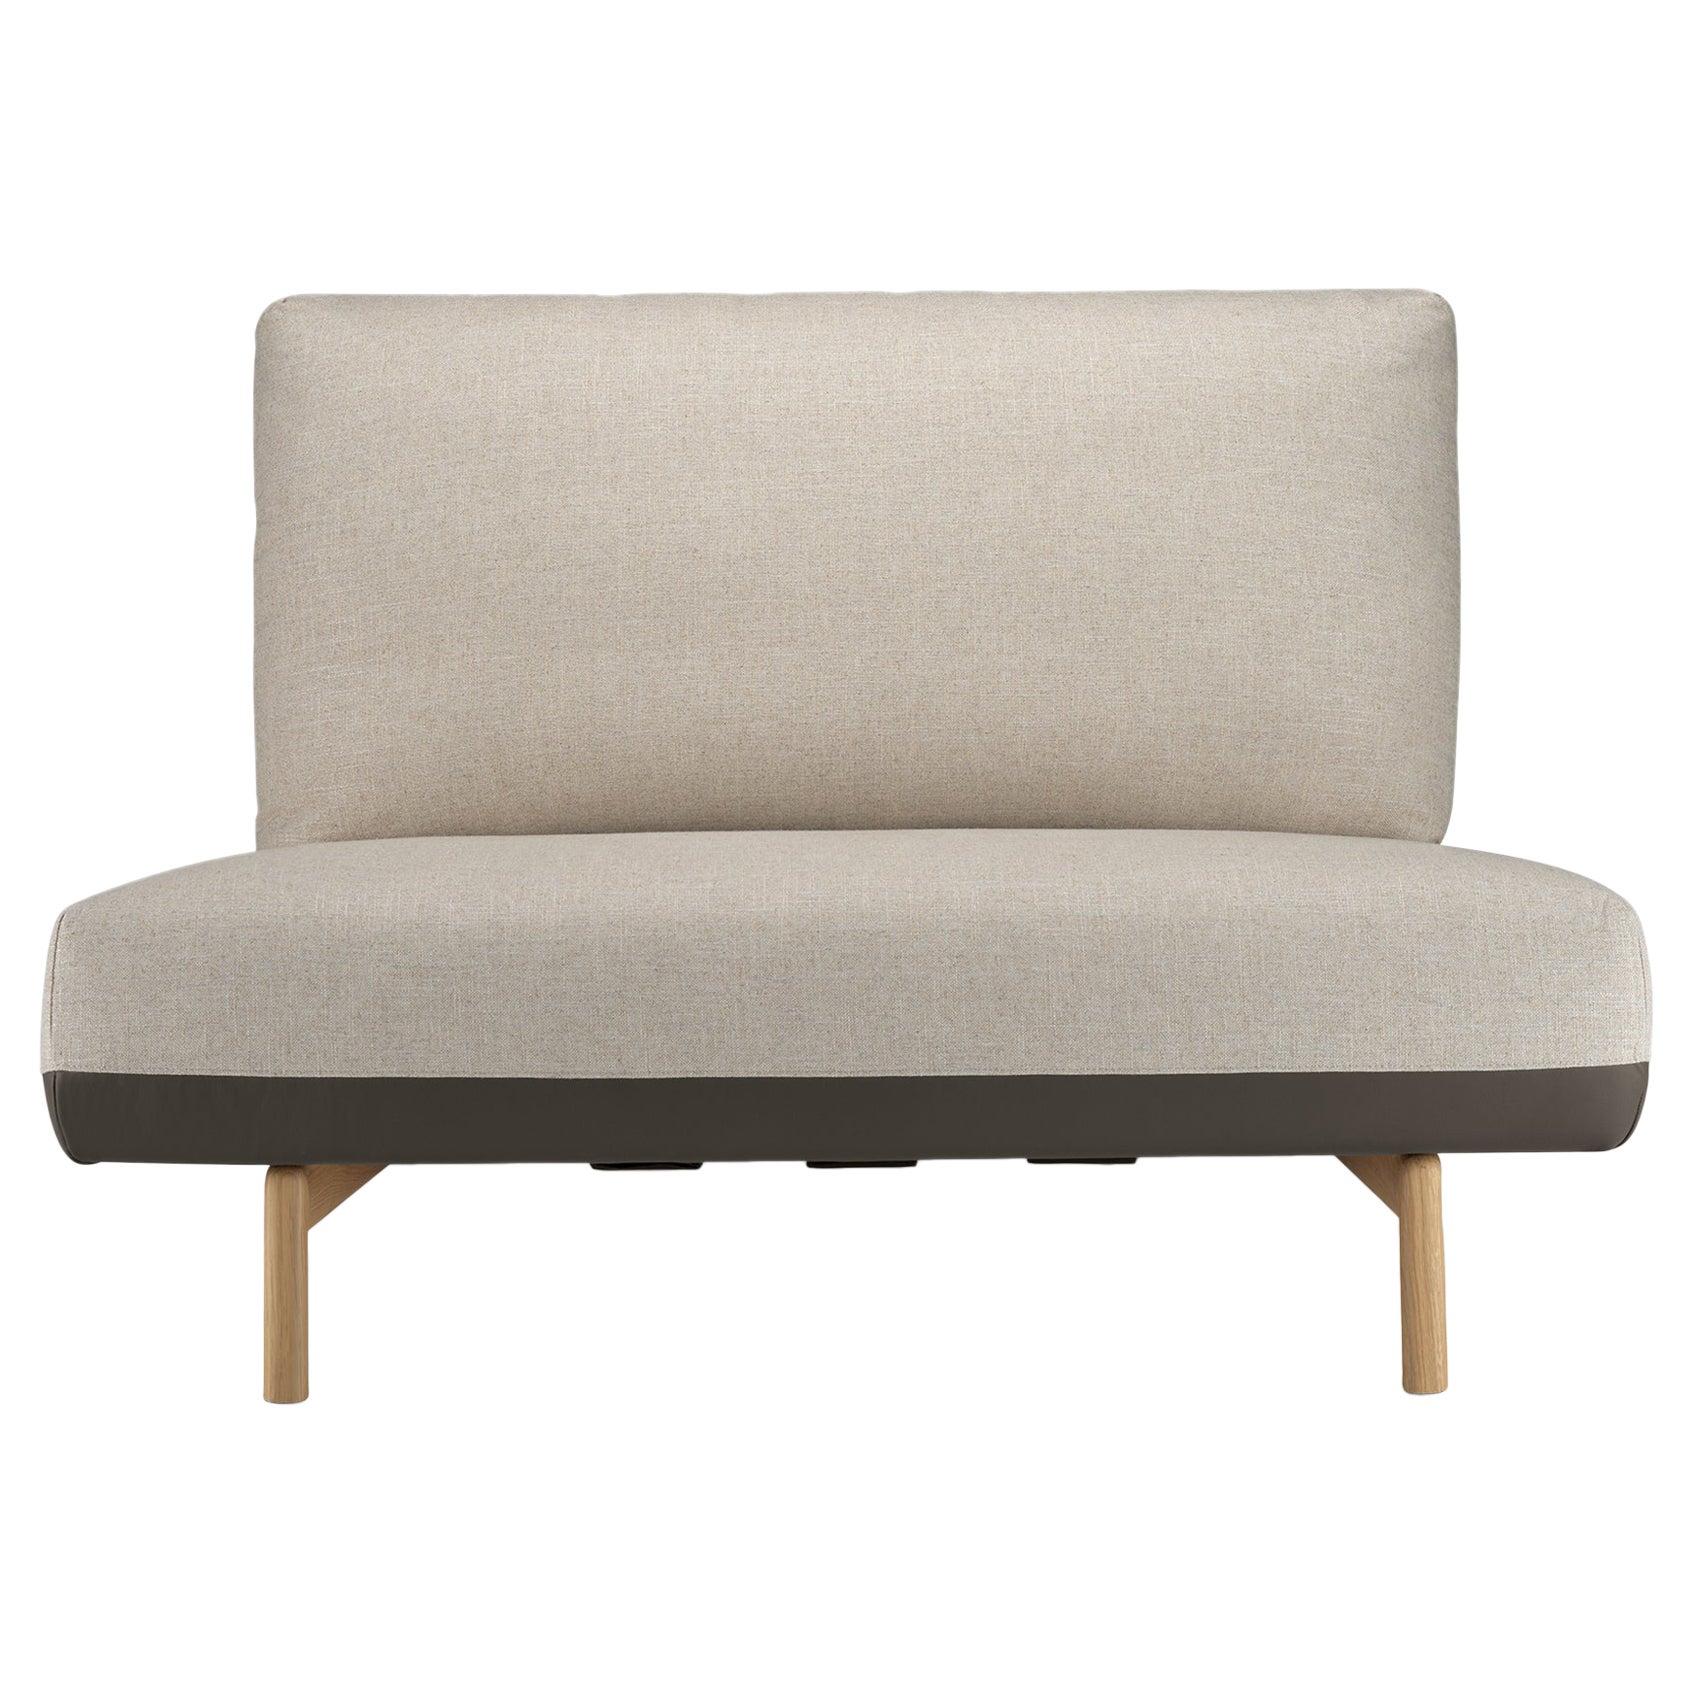 Alias D10 Trigono Armchair in Beige Upholstery with Natural Oak Frame